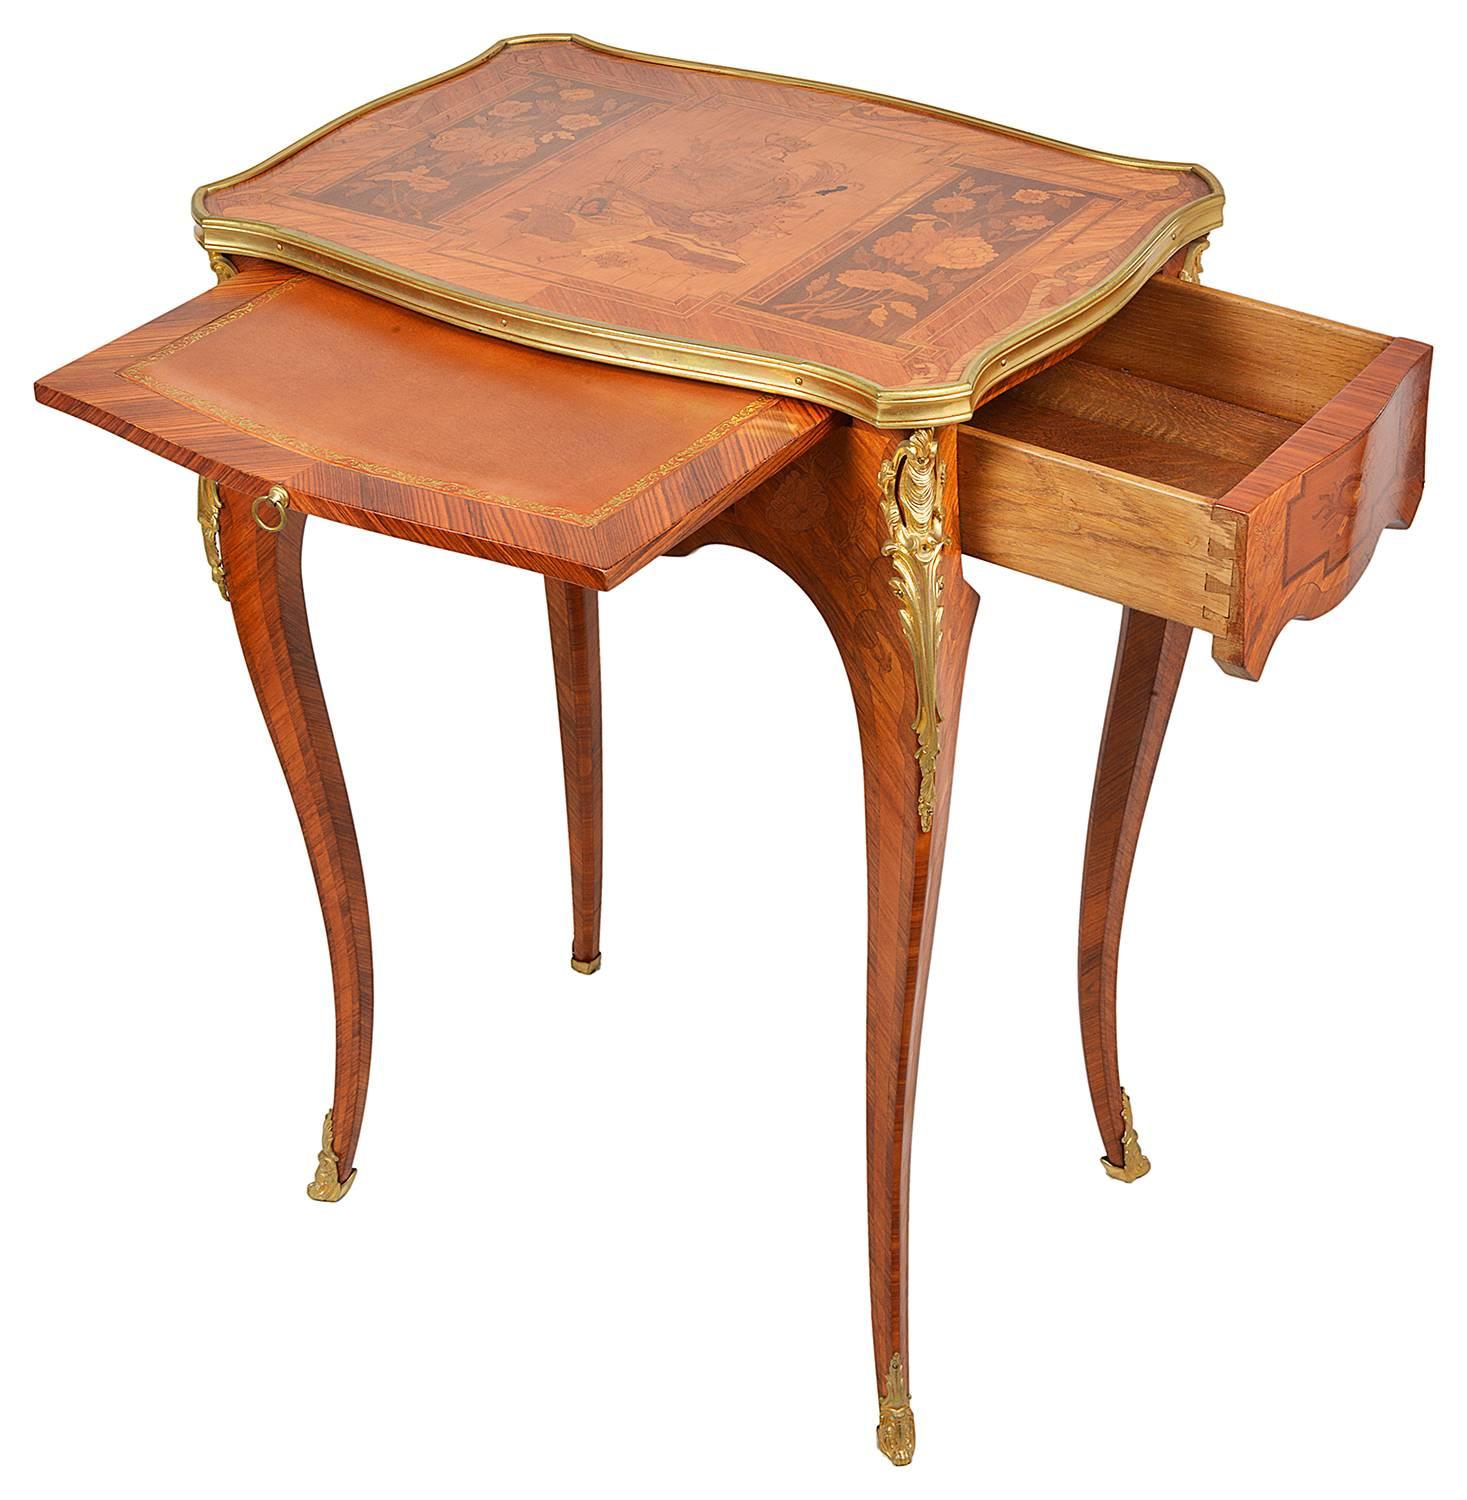 A very good quality late 19th century marquetry inlaid Louis XVI style side table. The top depicting musical instruments and floral decoration. Having a single frieze drawer and writing slide to the side. Raised on elegant cabriole legs with gilded